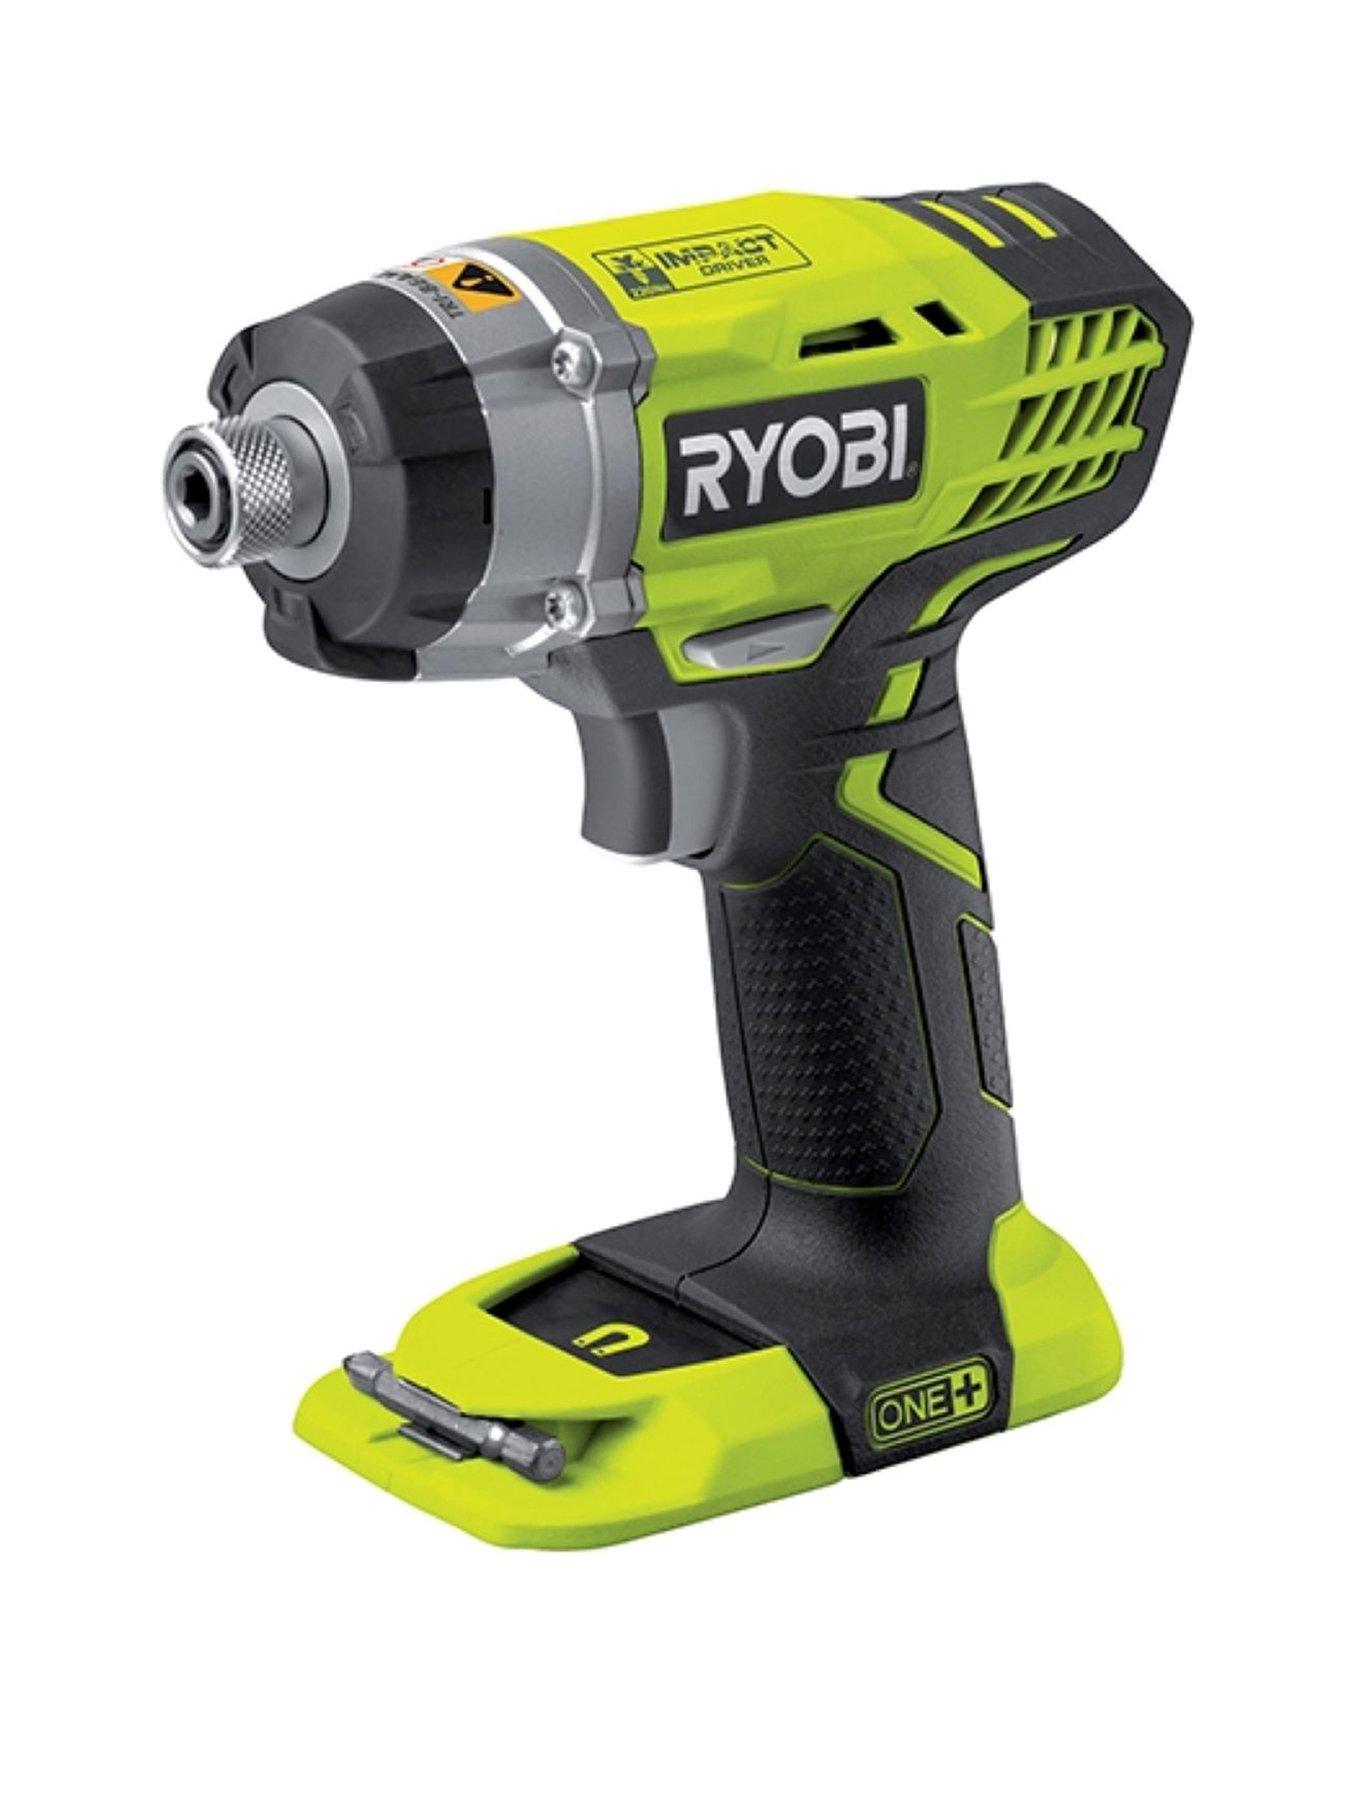 & RB18L50 ONE+ Lithium+ 5.0Ah Battery Body Only Ryobi R18IW3-0 18V ONE+ Cordless 3-Speed Impact Wrench 18 V